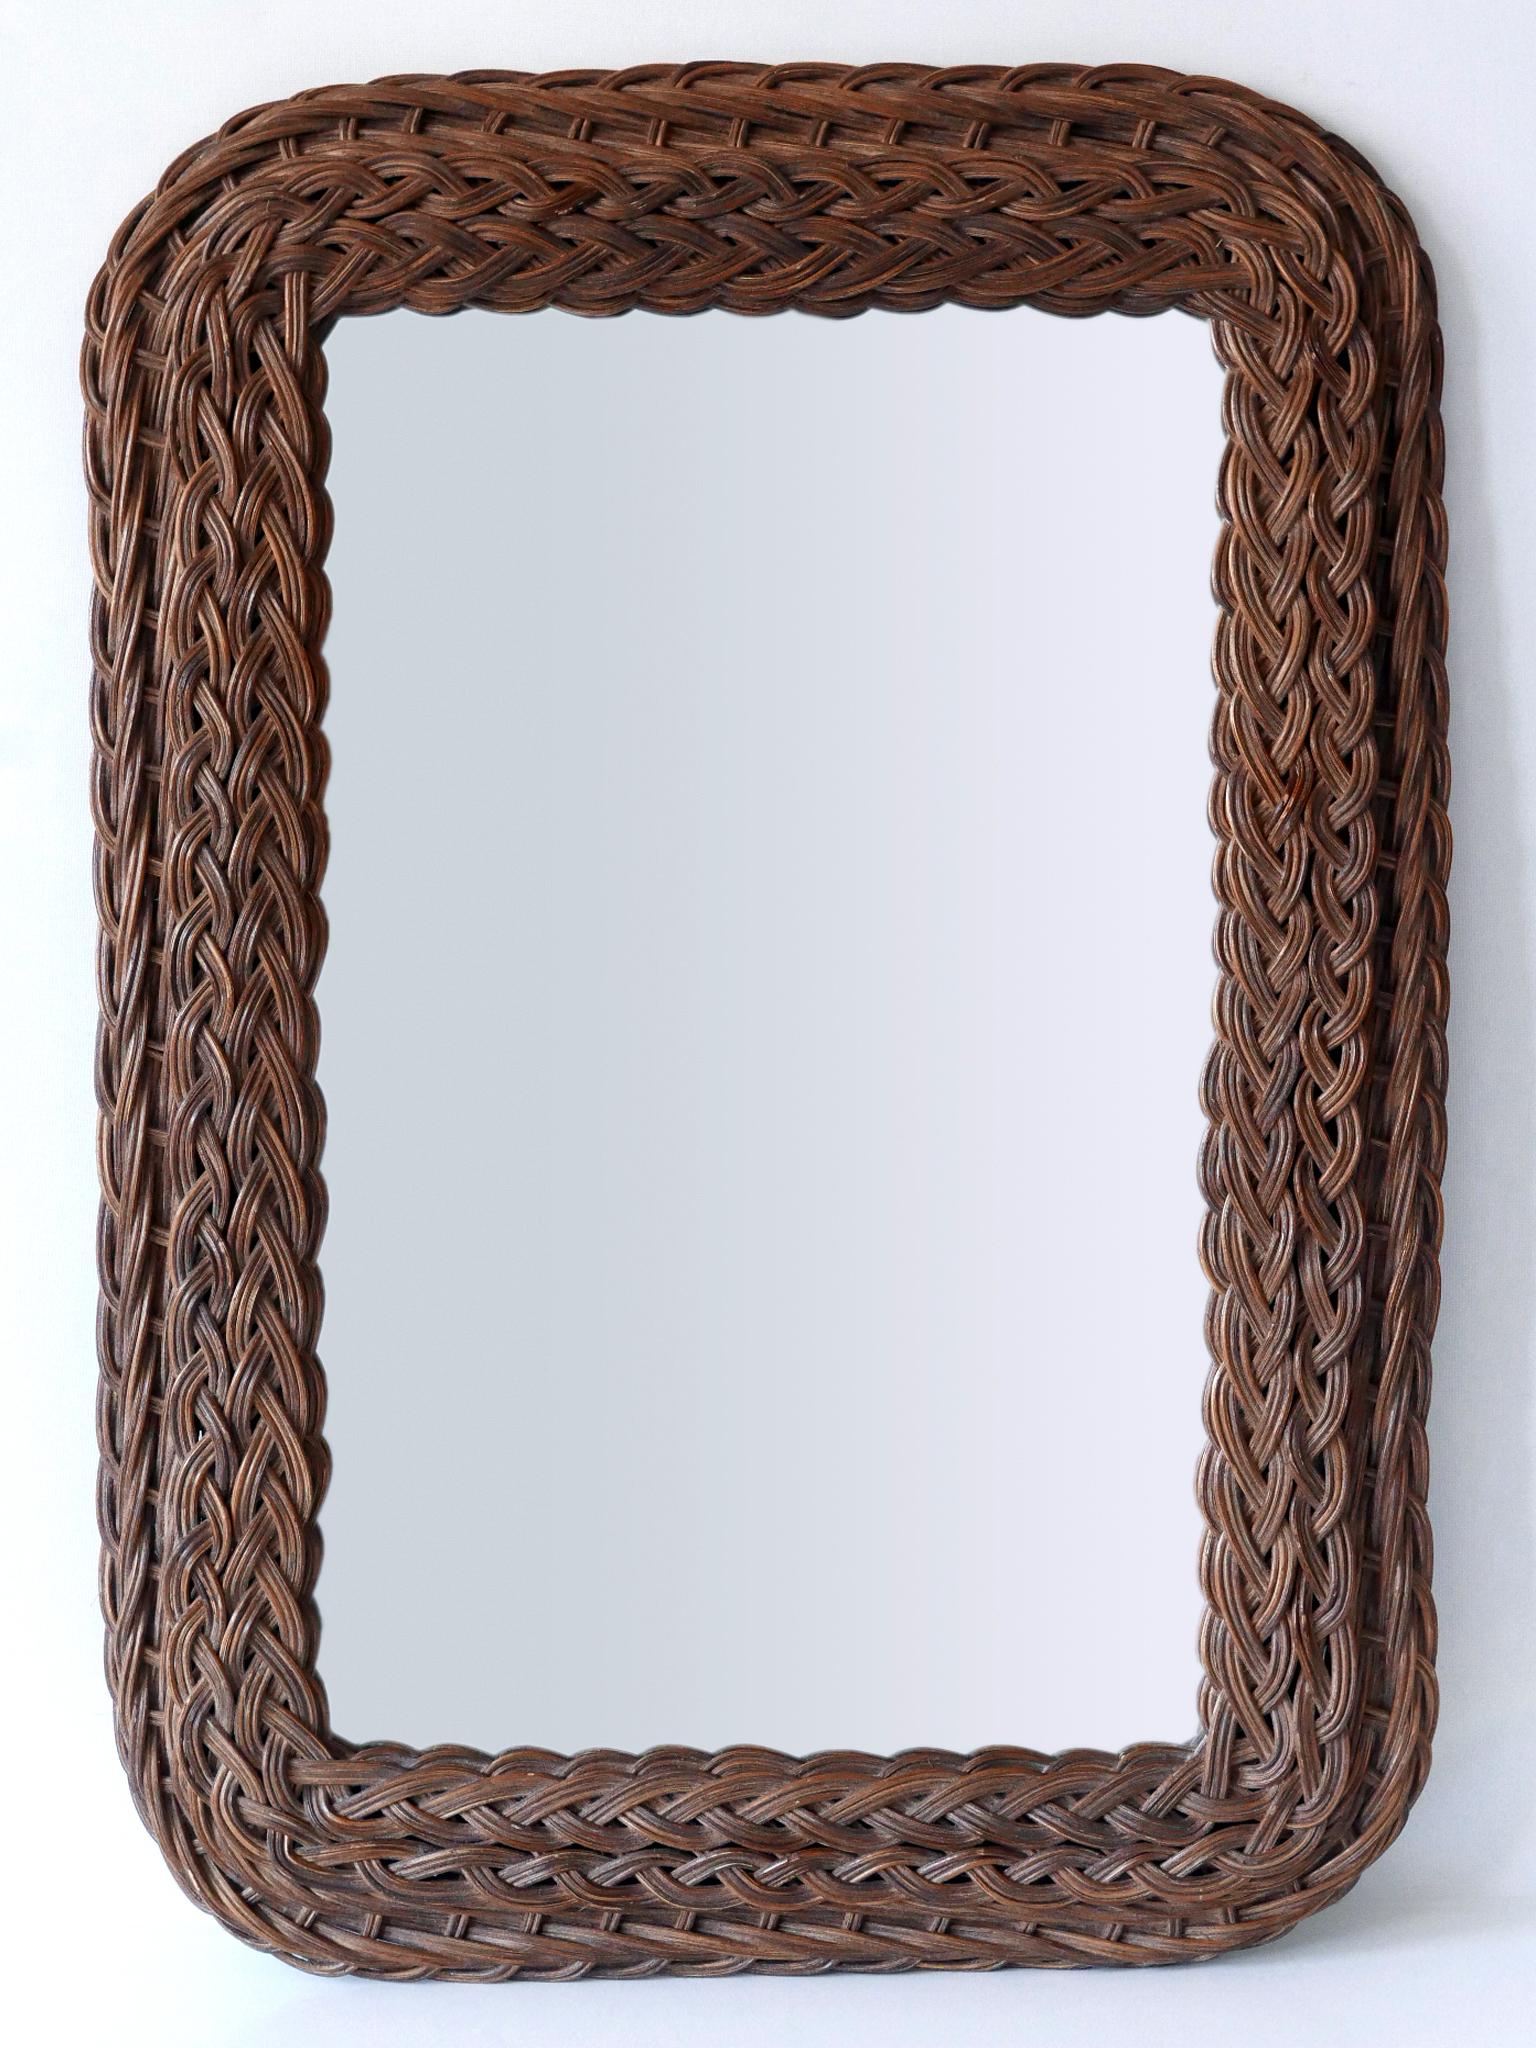 Highly decorative and elegant Mid-Century Modern rectangular wall mirror. Manufactured probably in Italy, 1960s.

Executed in rattan, bamboo and mirrored glass.

Condition:
Good original vintage condition. Wear consistent with use and age.